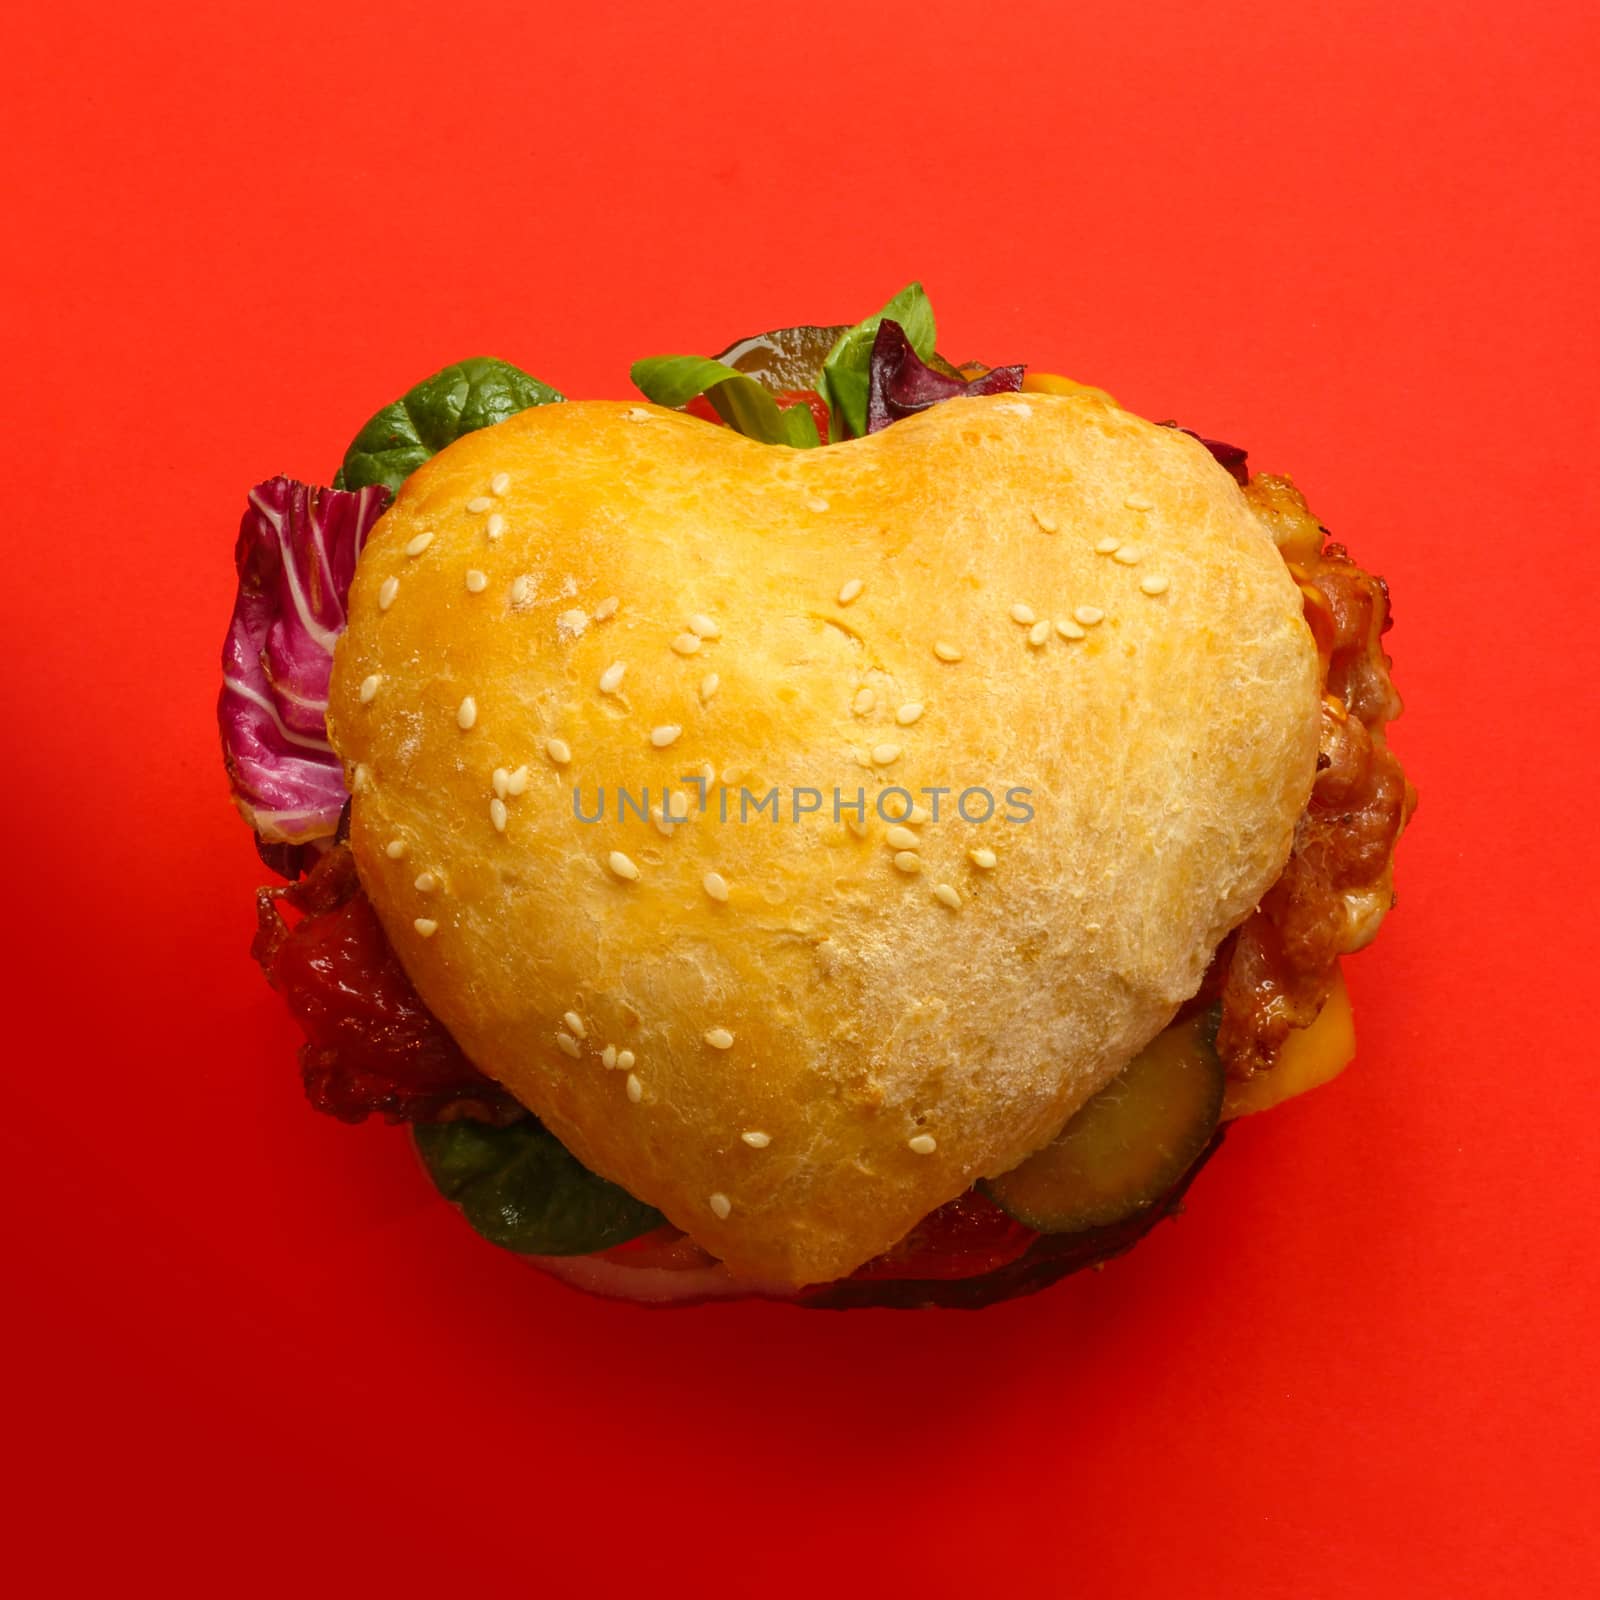 Heart shaped hamburger, love burger fast food concept, on red background, top view